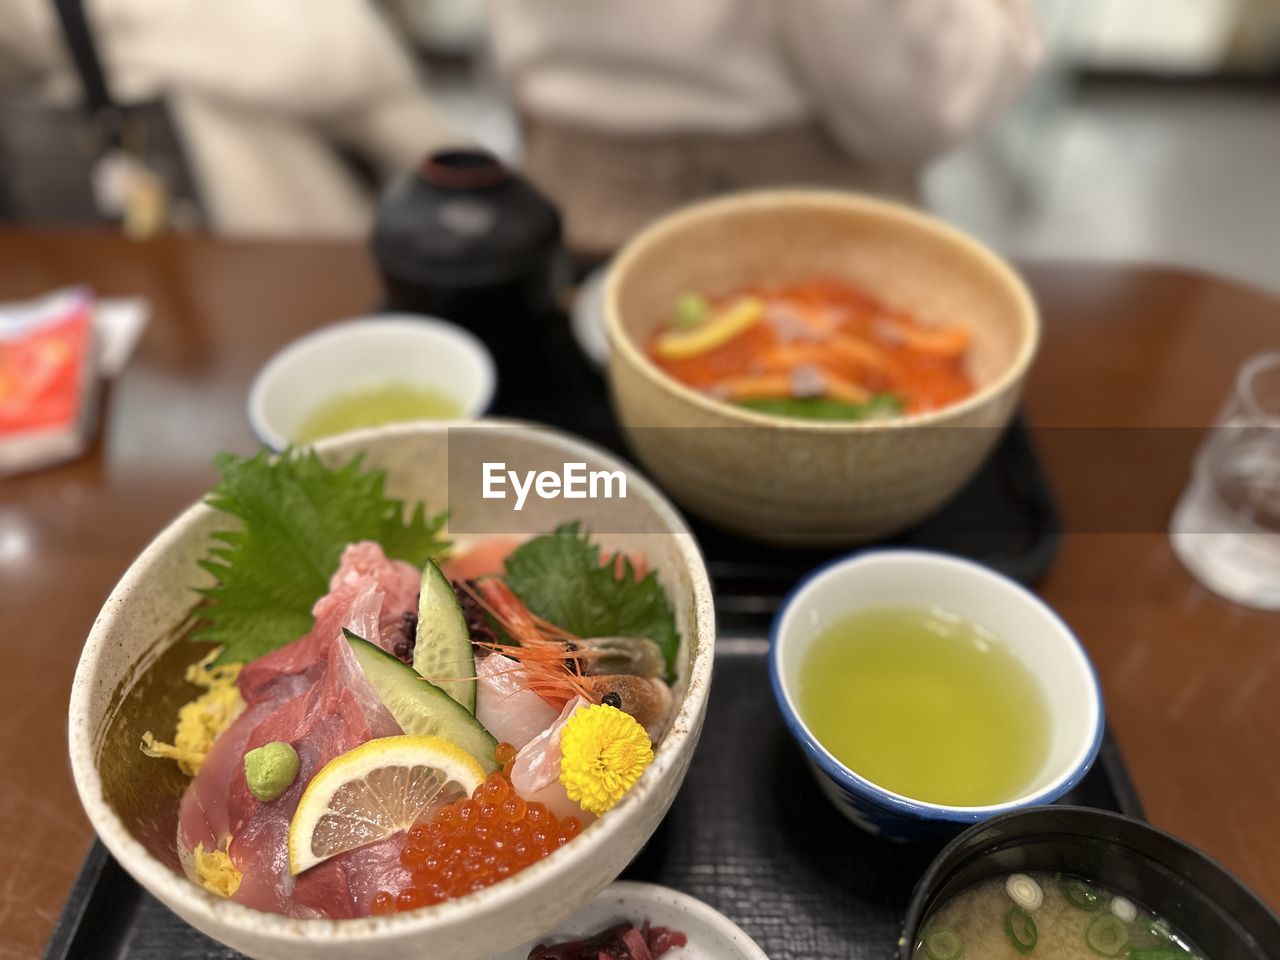 food and drink, food, healthy eating, lunch, bowl, asian food, dish, meal, cuisine, wellbeing, chinese food, freshness, vegetable, indoors, no people, table, meat, focus on foreground, plate, fruit, savory food, condiment, seafood, close-up, variation